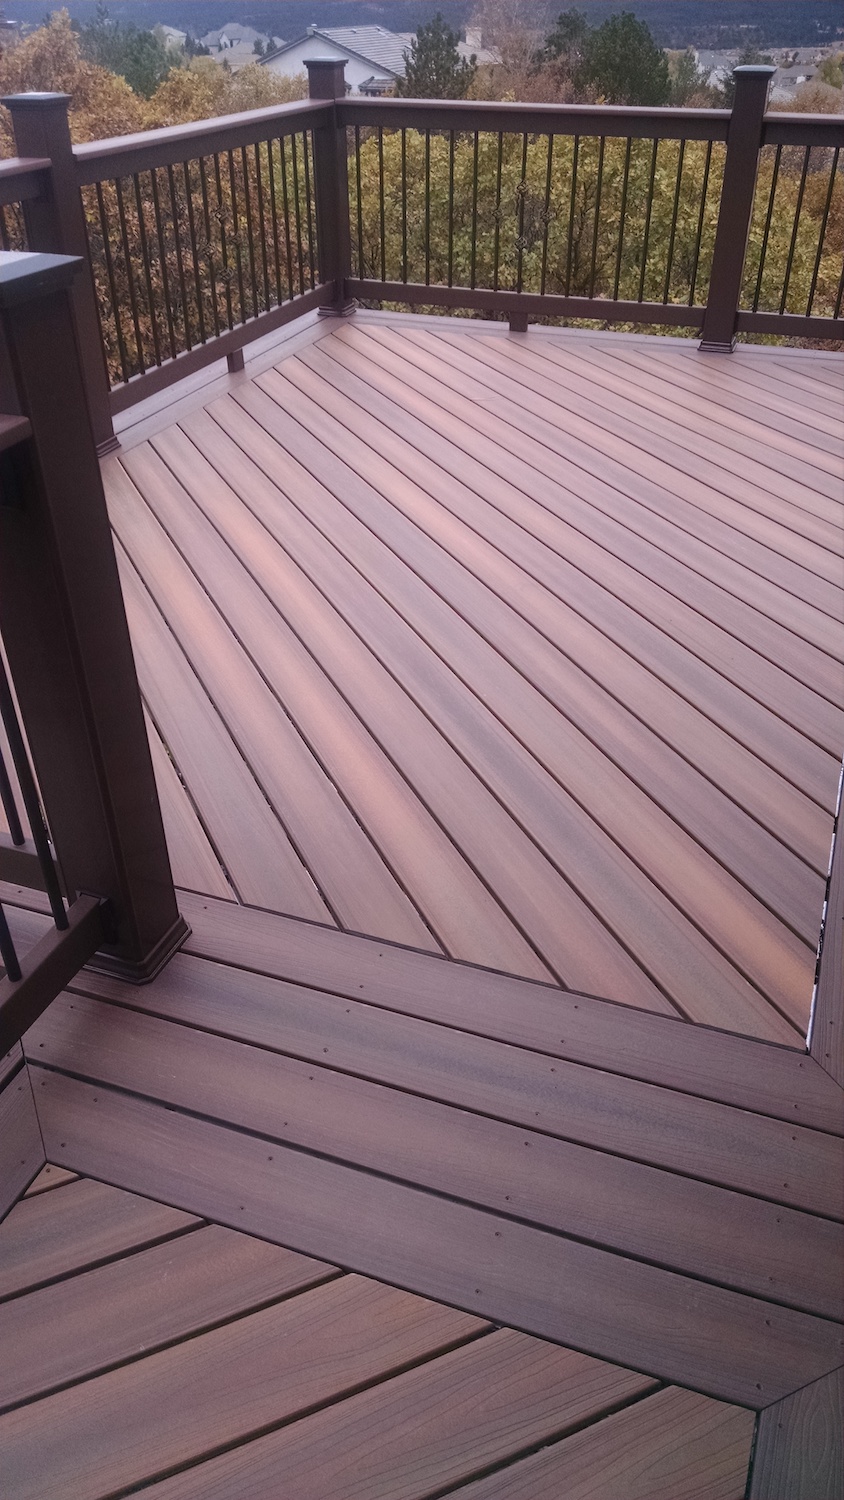 Trex deck laid out at a 45-degree angle to the joists.